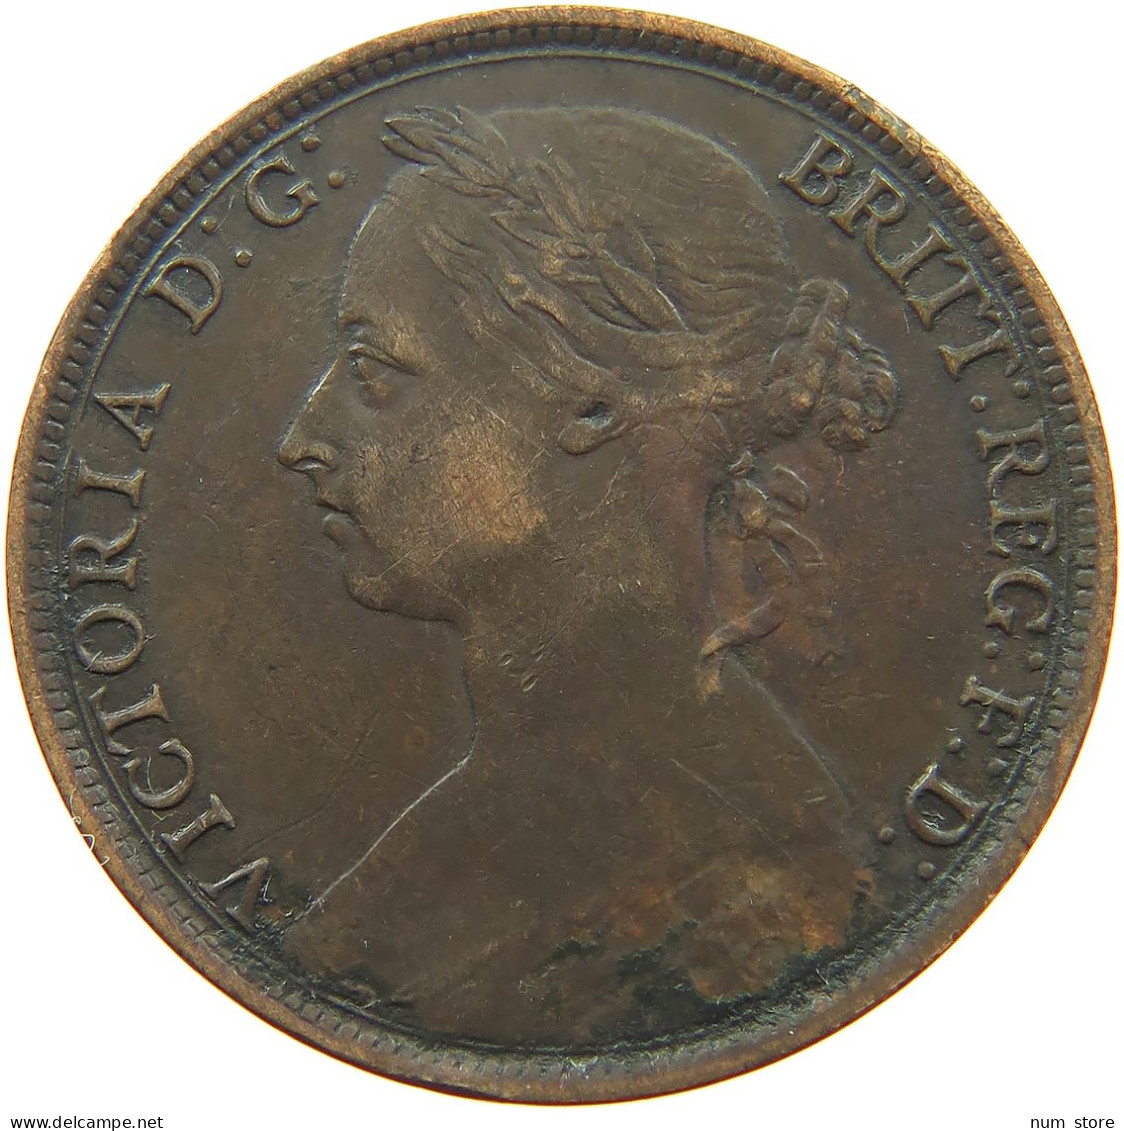 GREAT BRITAIN PENNY 1889 Victoria 1837-1901 #s076 0589 - D. 1 Penny